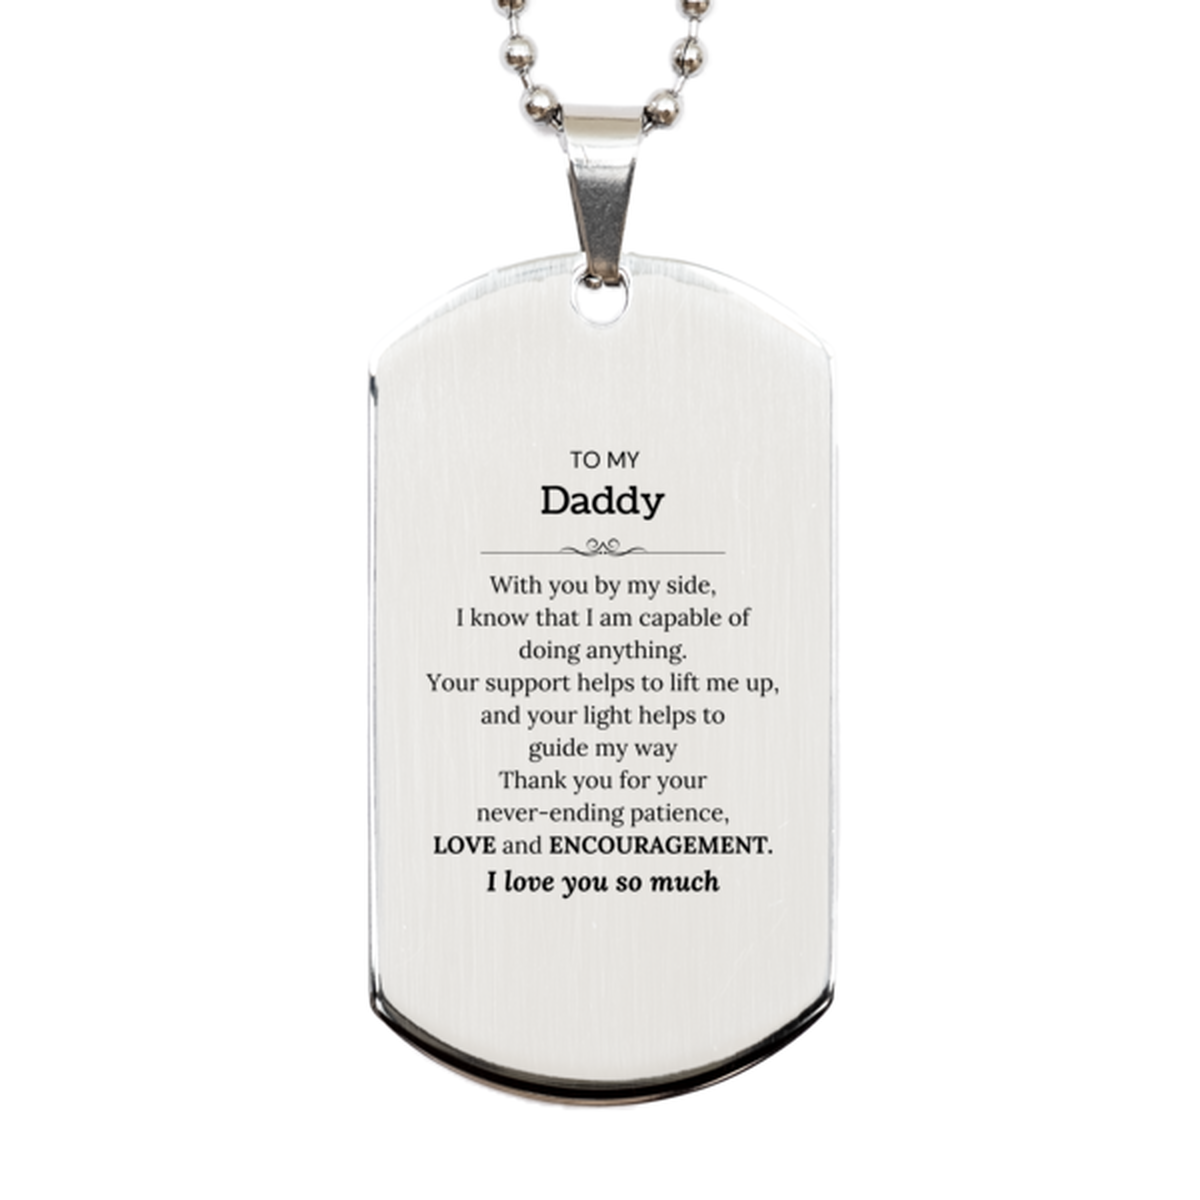 Appreciation Daddy Silver Dog Tag Gifts, To My Daddy Birthday Christmas Wedding Keepsake Gifts for Daddy With you by my side, I know that I am capable of doing anything. I love you so much